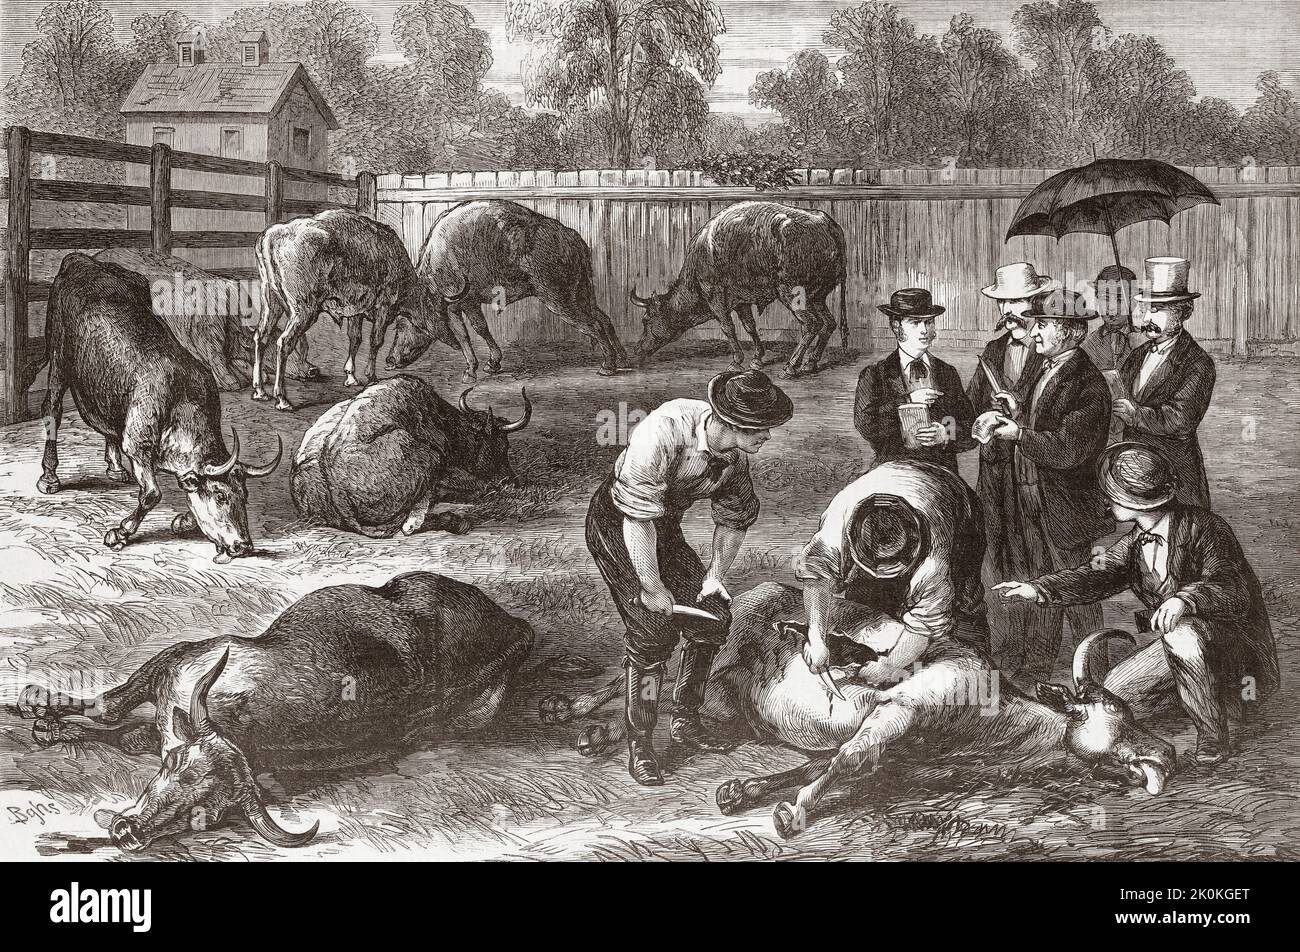 Members of the New York Board of Health examine animals stricken by cattle plague (also known as Steppe Murrain or Rinderpest) in 1868.  After an illustration in Frank Leslie's Illustrated Newspaper. Stock Photo